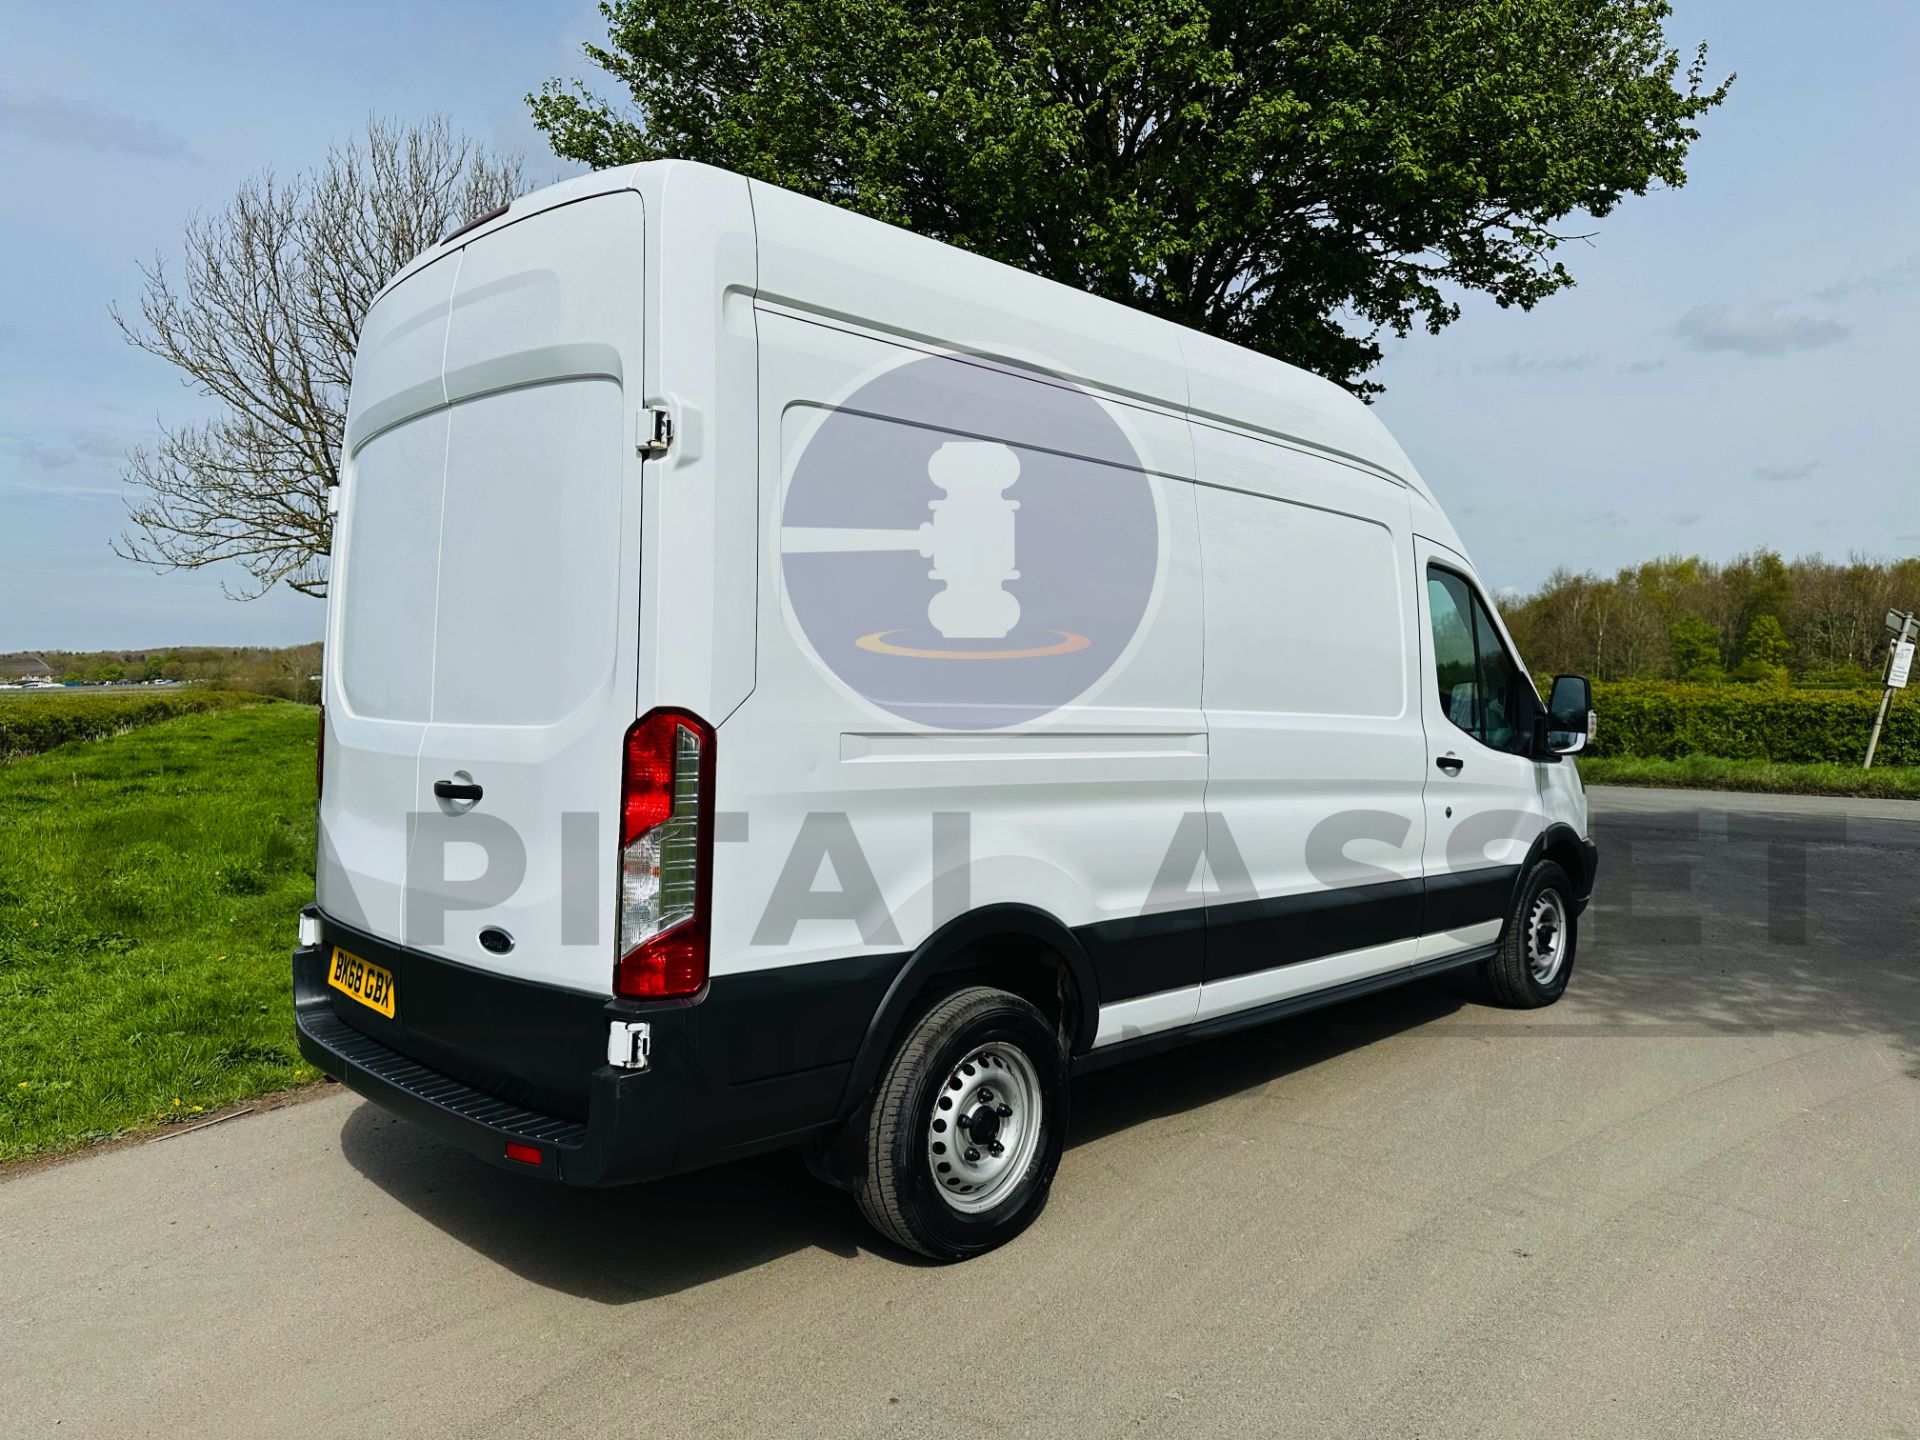 FORD TRANSIT 350 2.0 TDCI *ECOBLUE EDITION* LWB HIGH TOP - EURO 6 - 2019 MODEL - 1 OWNER - LOOK!!! - Image 9 of 32